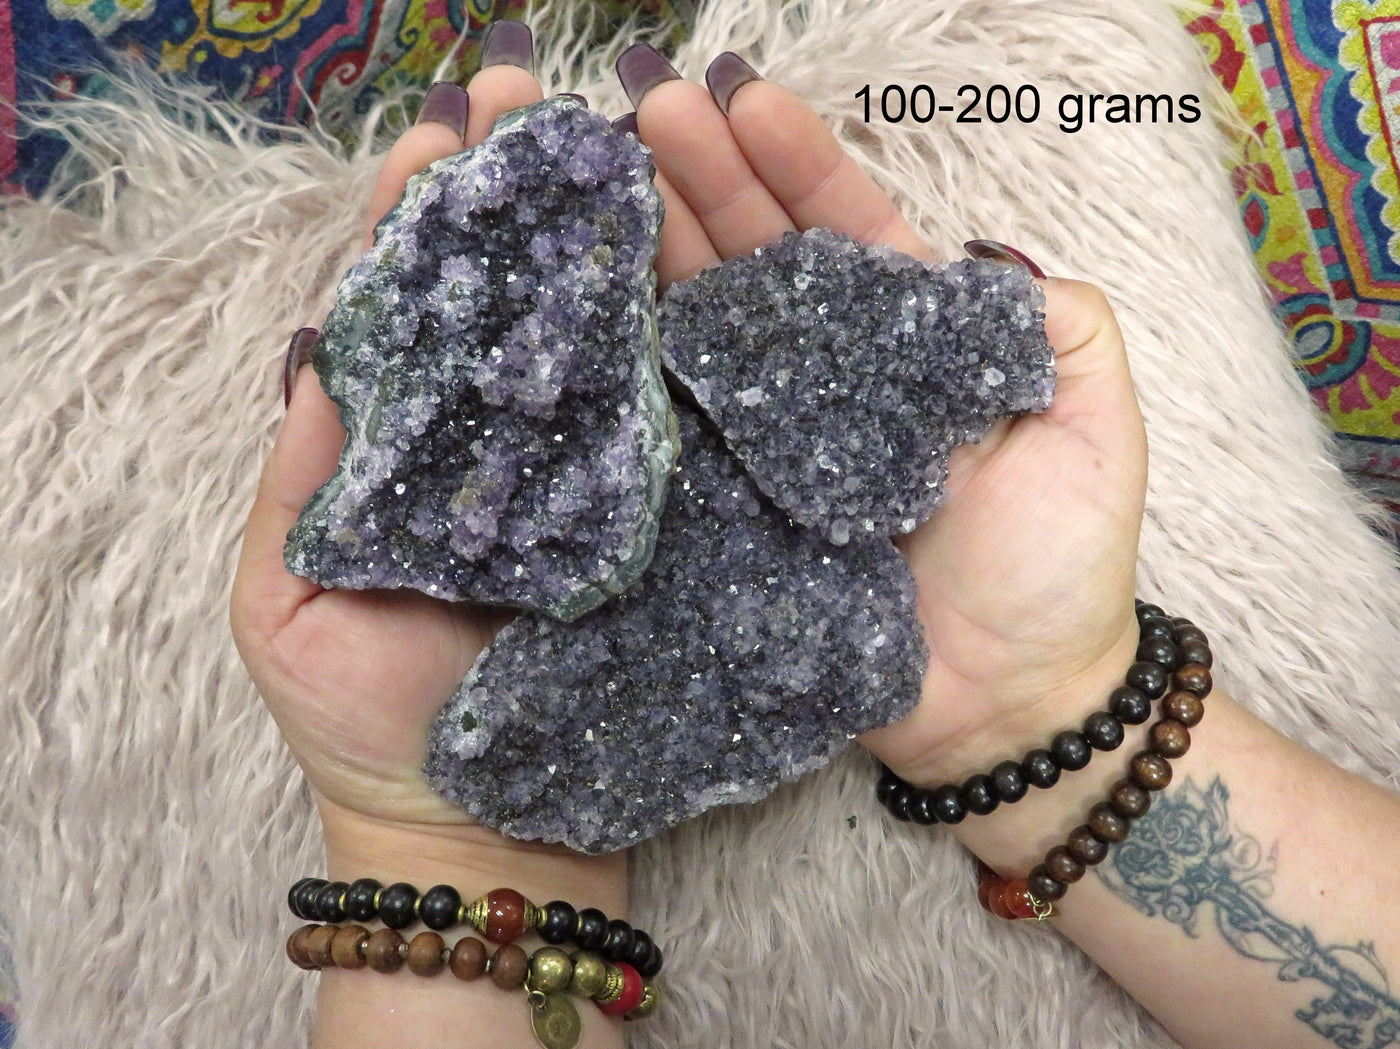 Multiple under 100 to 200 grams amethyst clusters are being held with both hands for size reference in this picture.